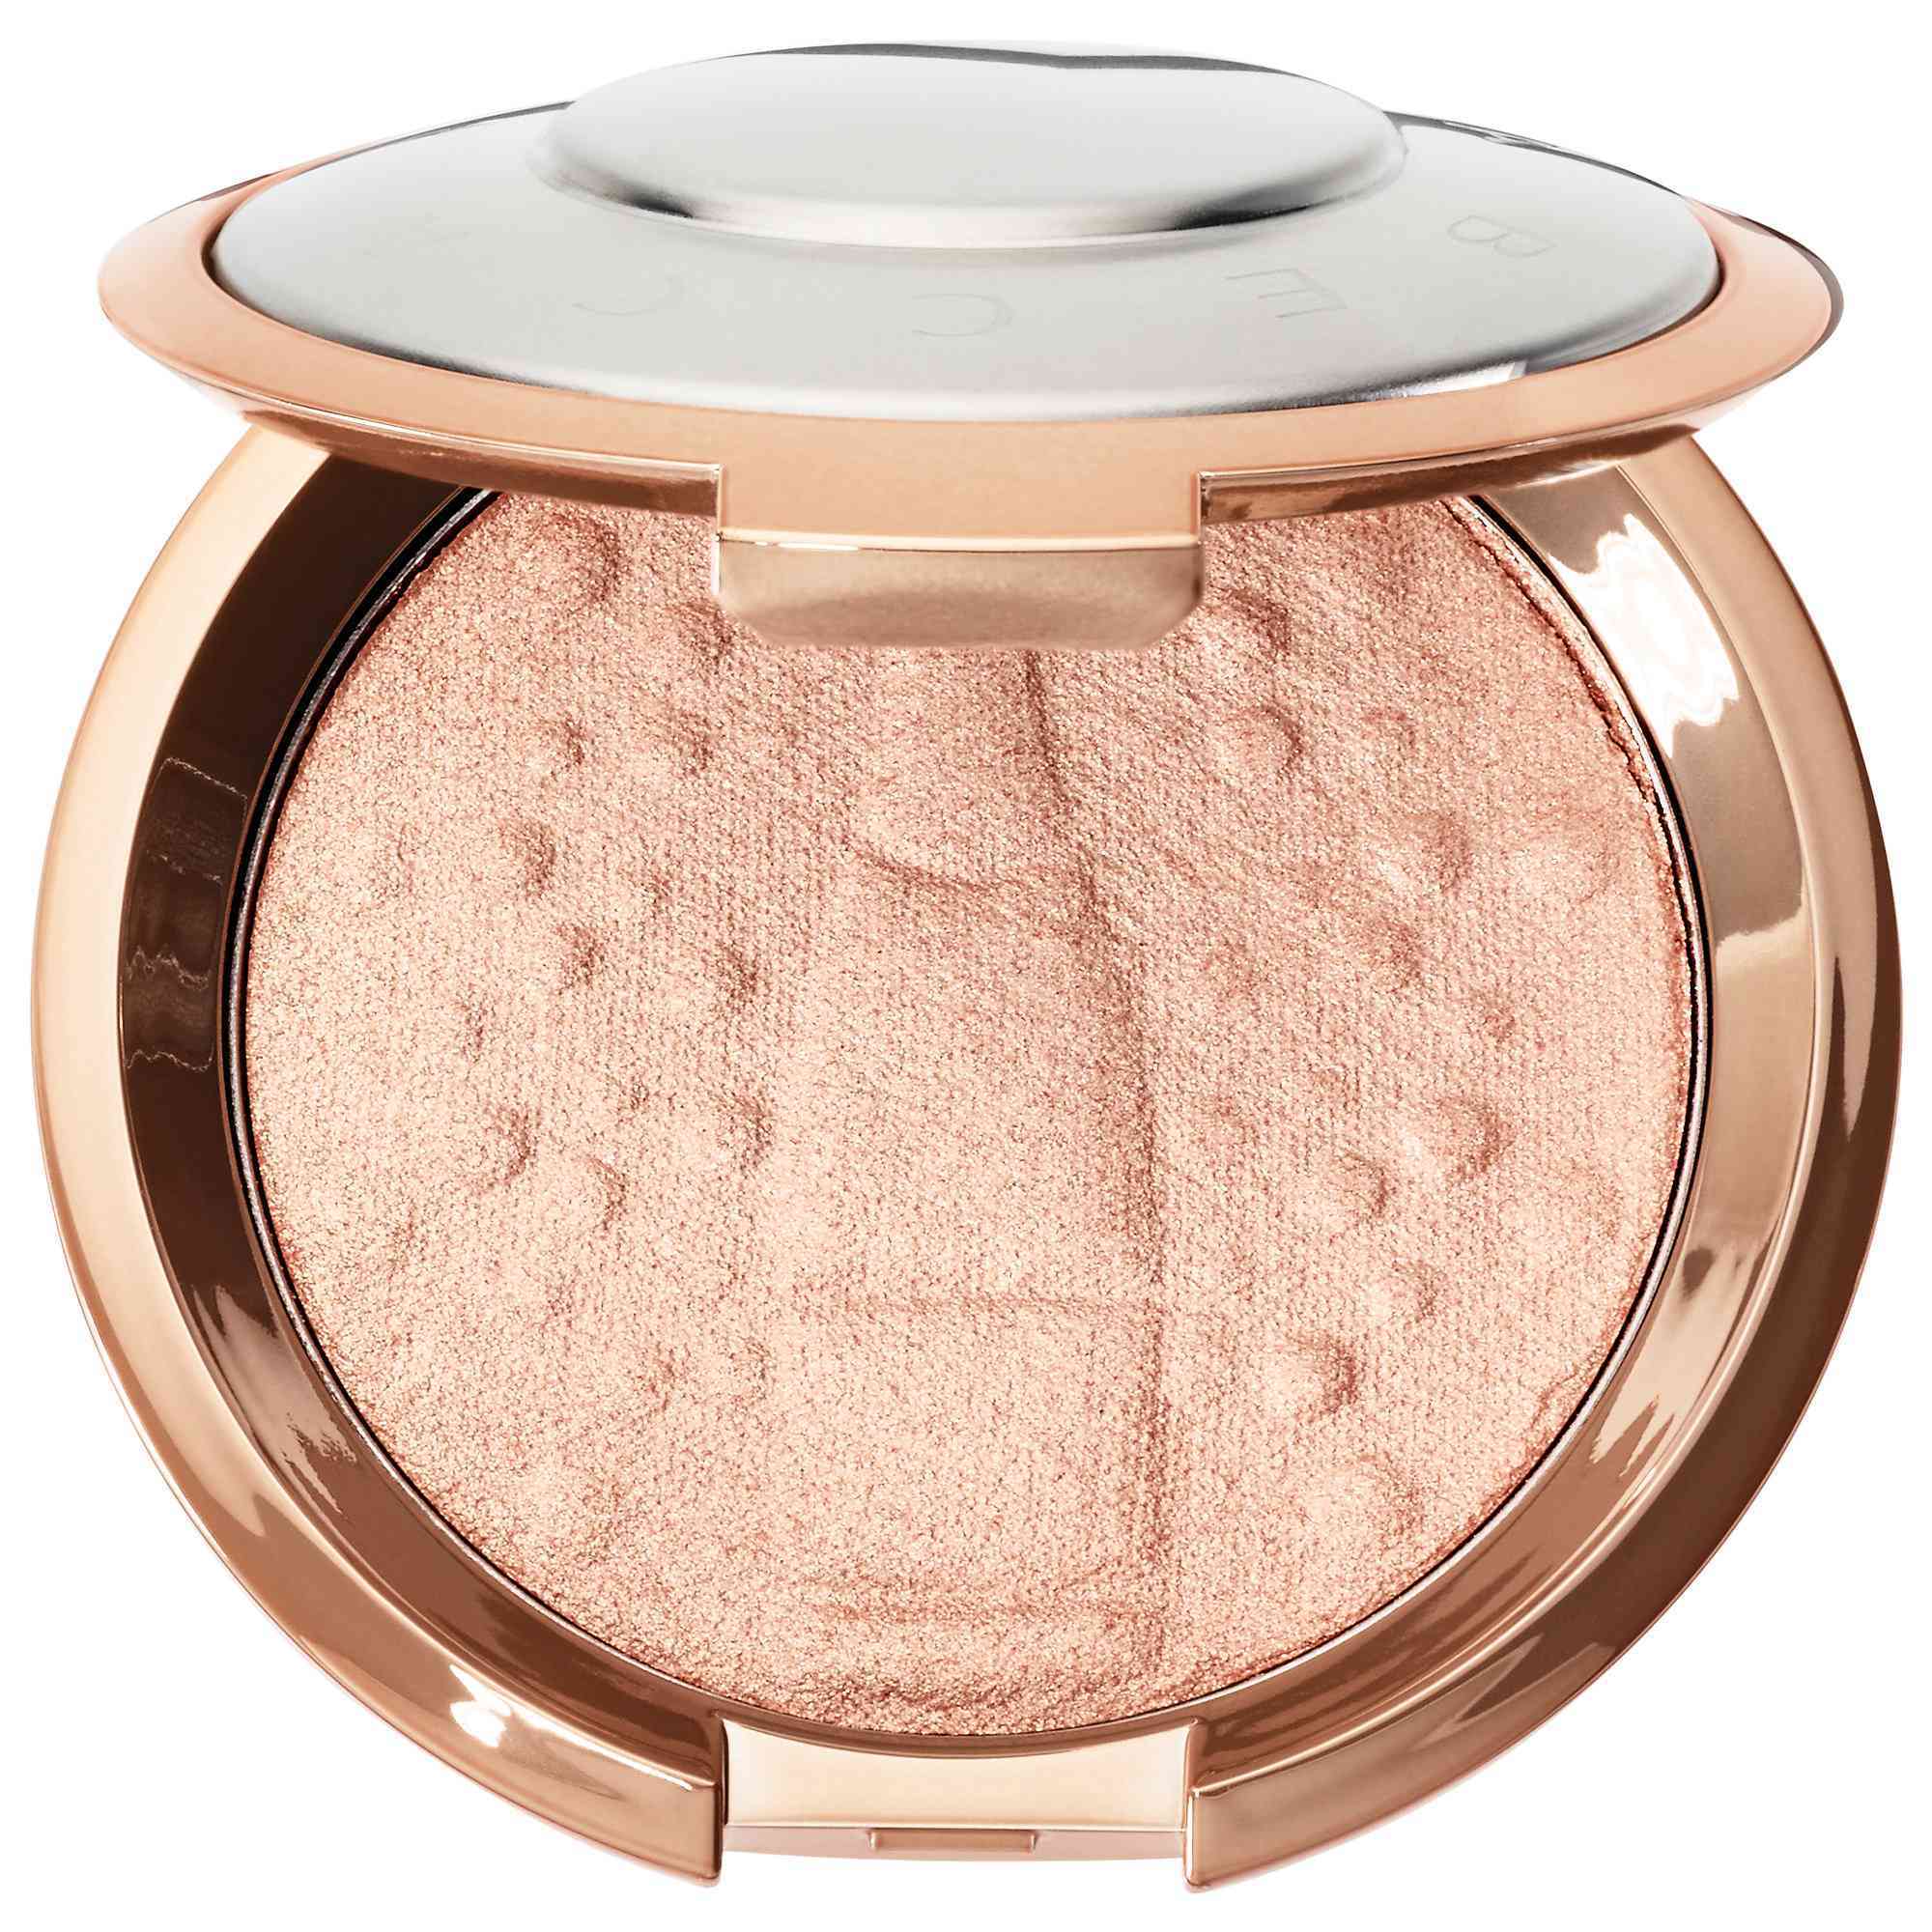 Becca Shimmering Skin Perfector - Champagne Pop